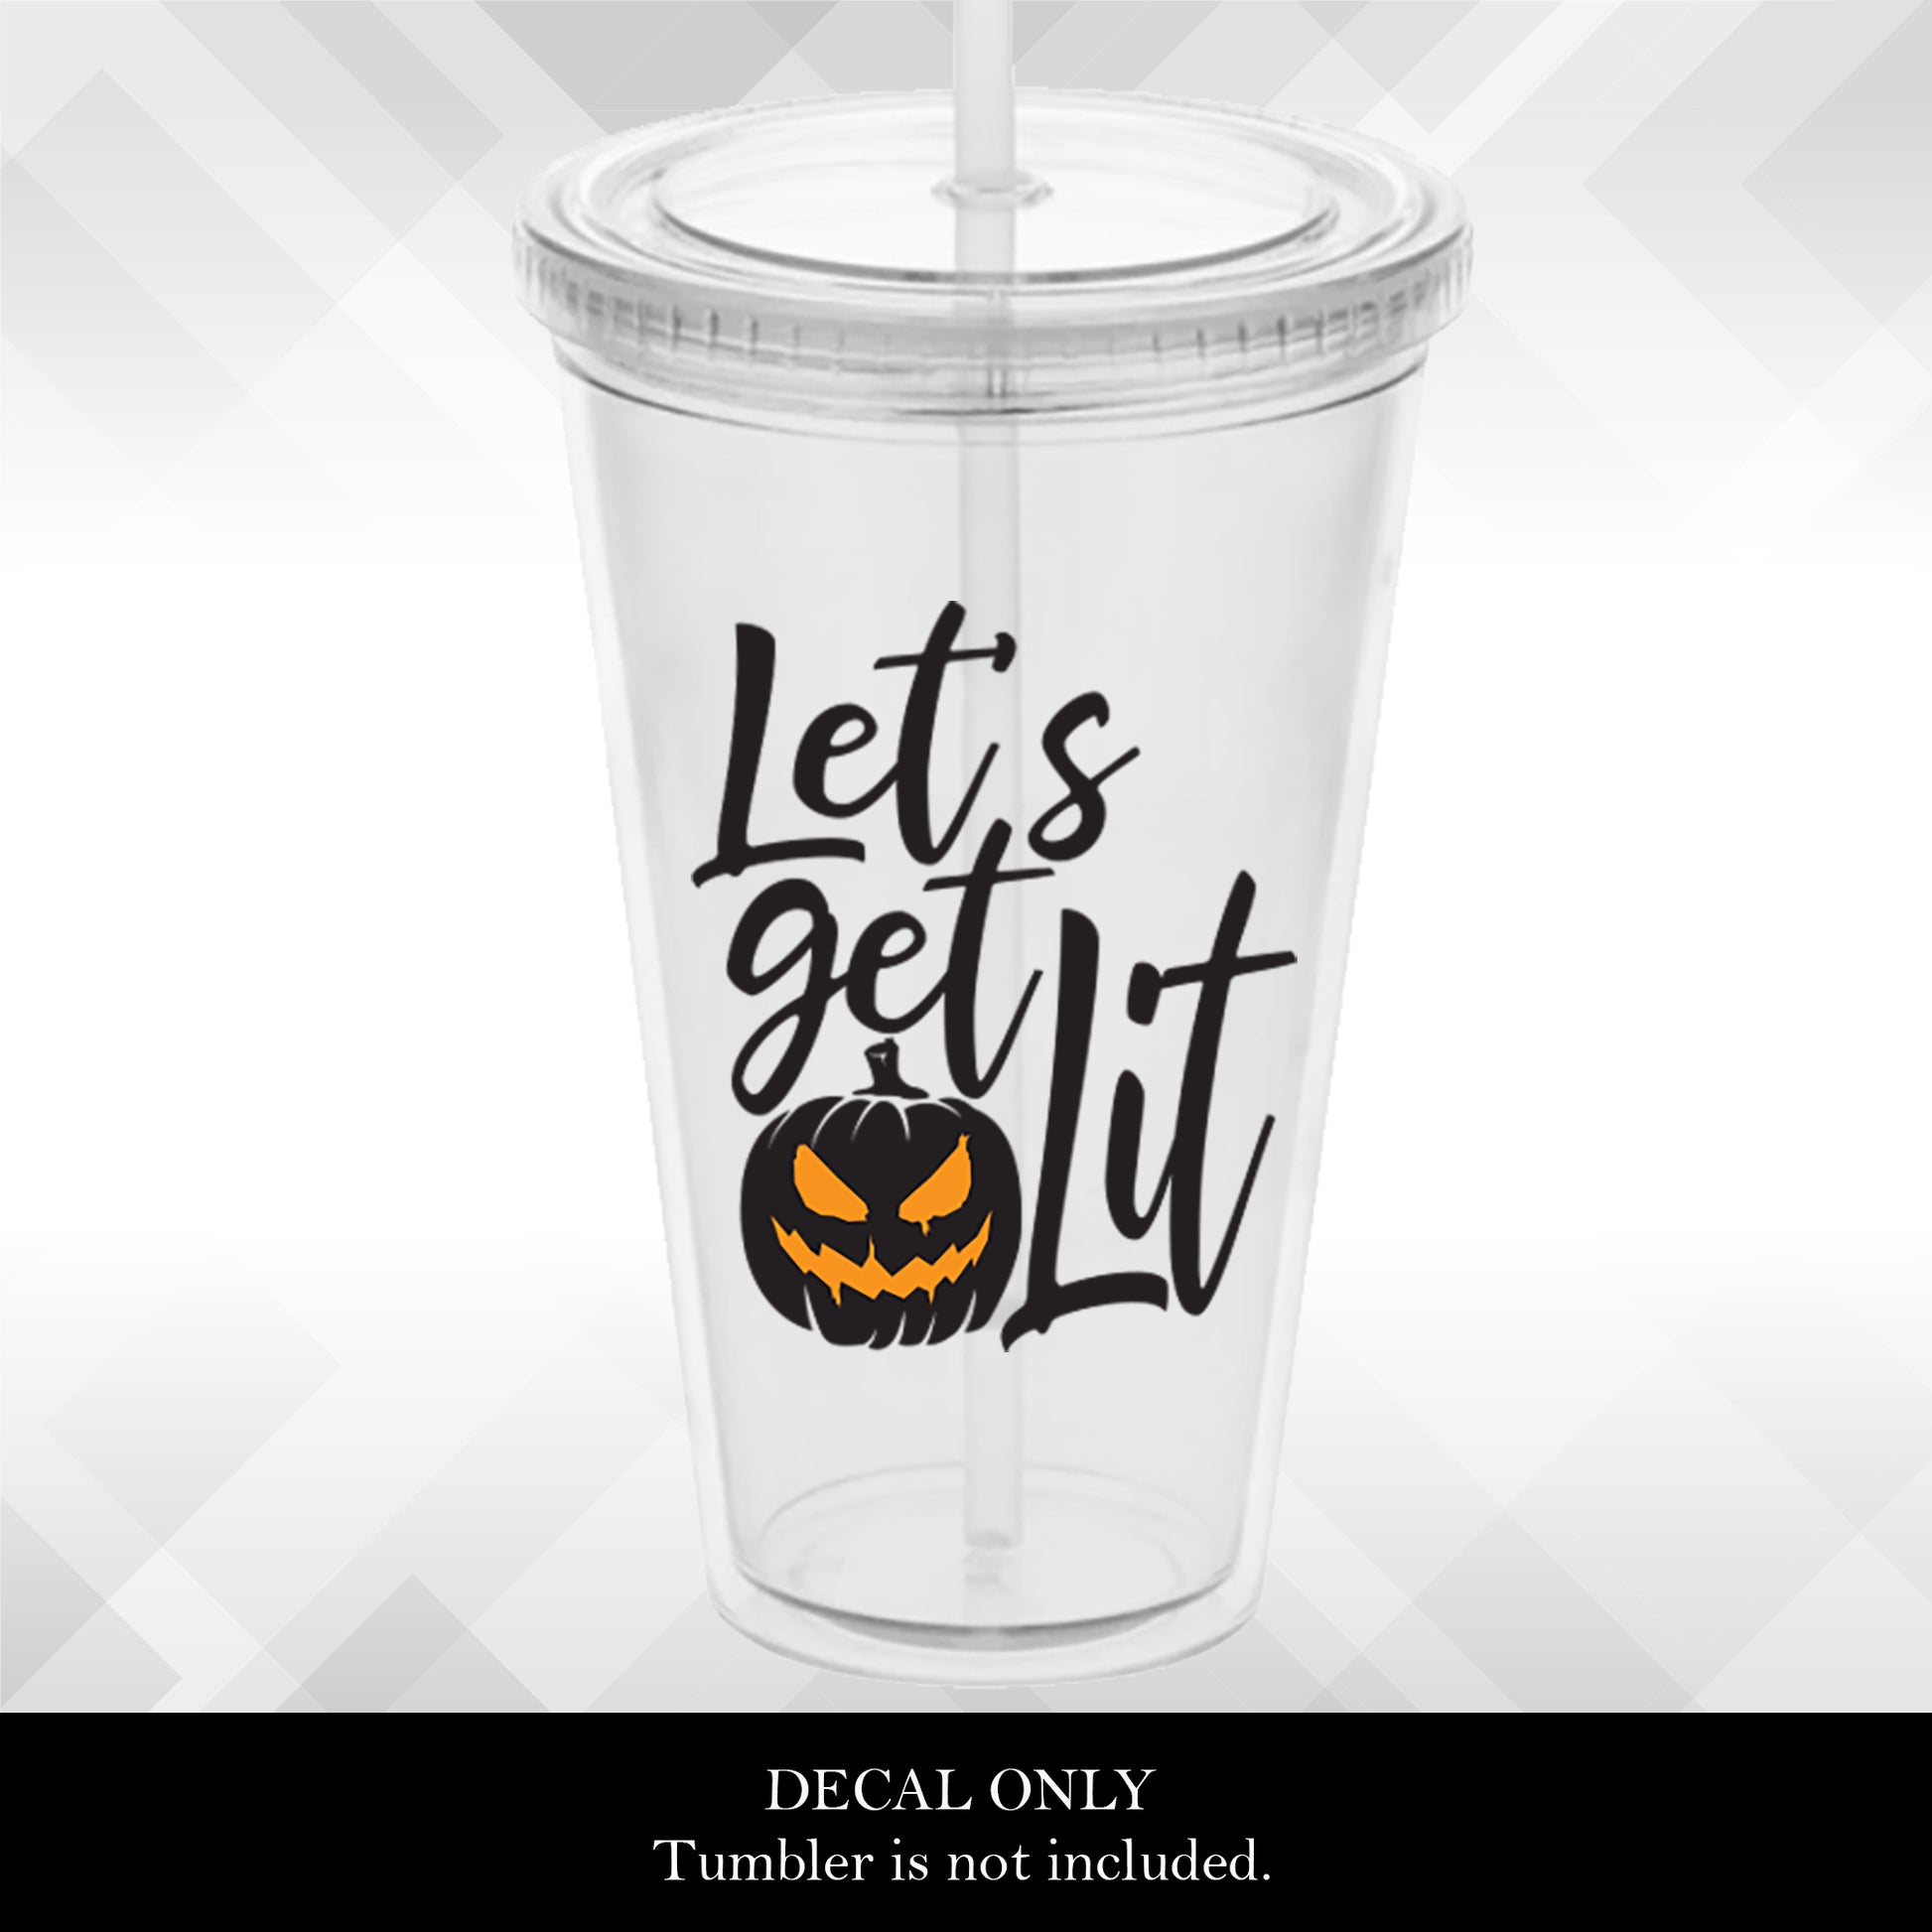 Decal Let's Get Lit Jack O Lantern for Halloween Tumblers, Wine Glasses